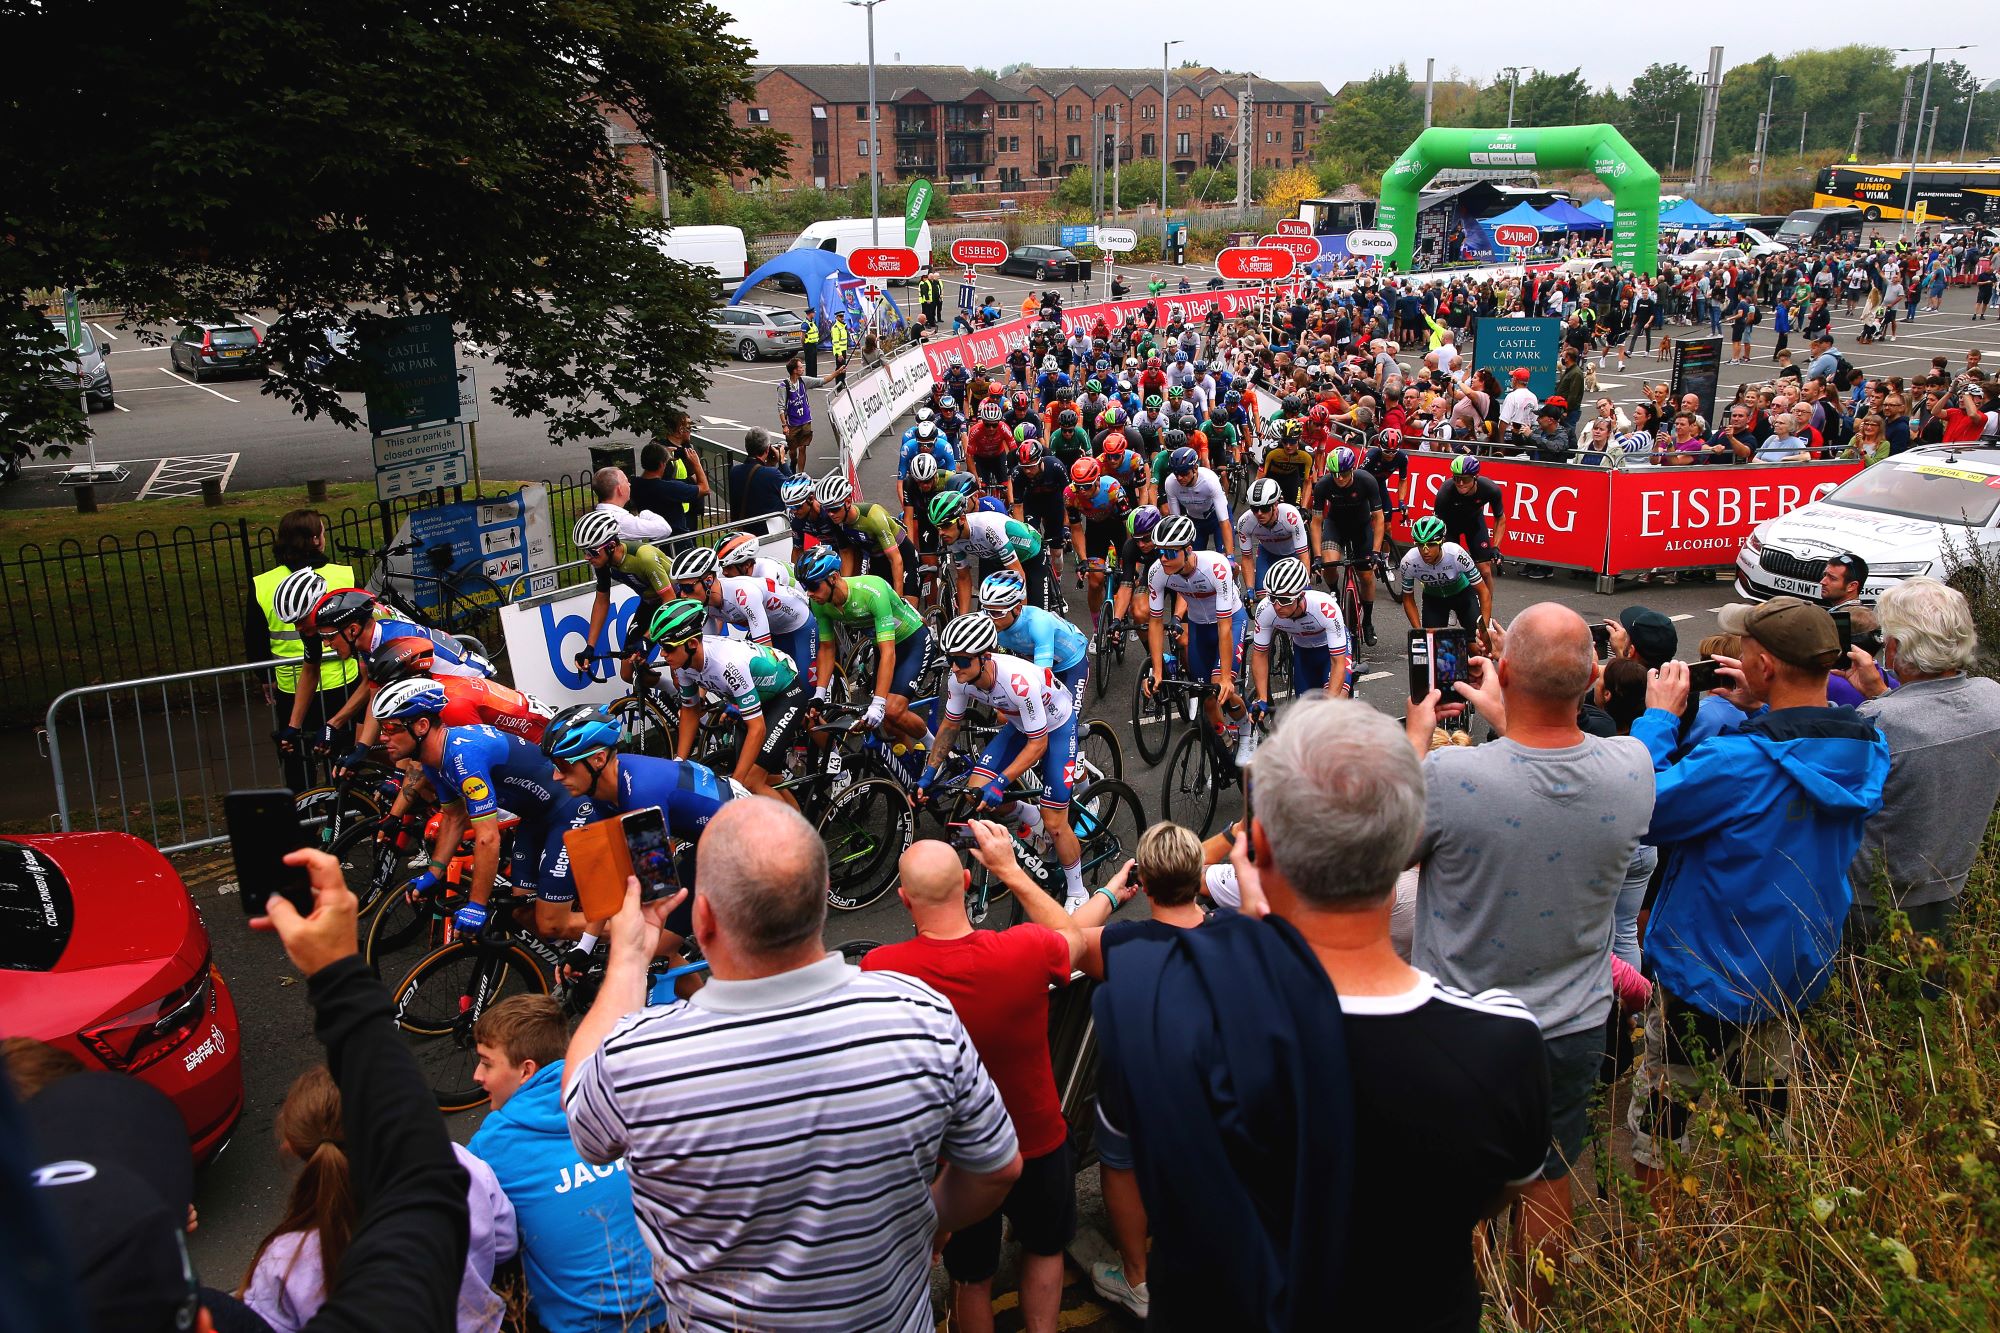 tour of britain cycle race 2022